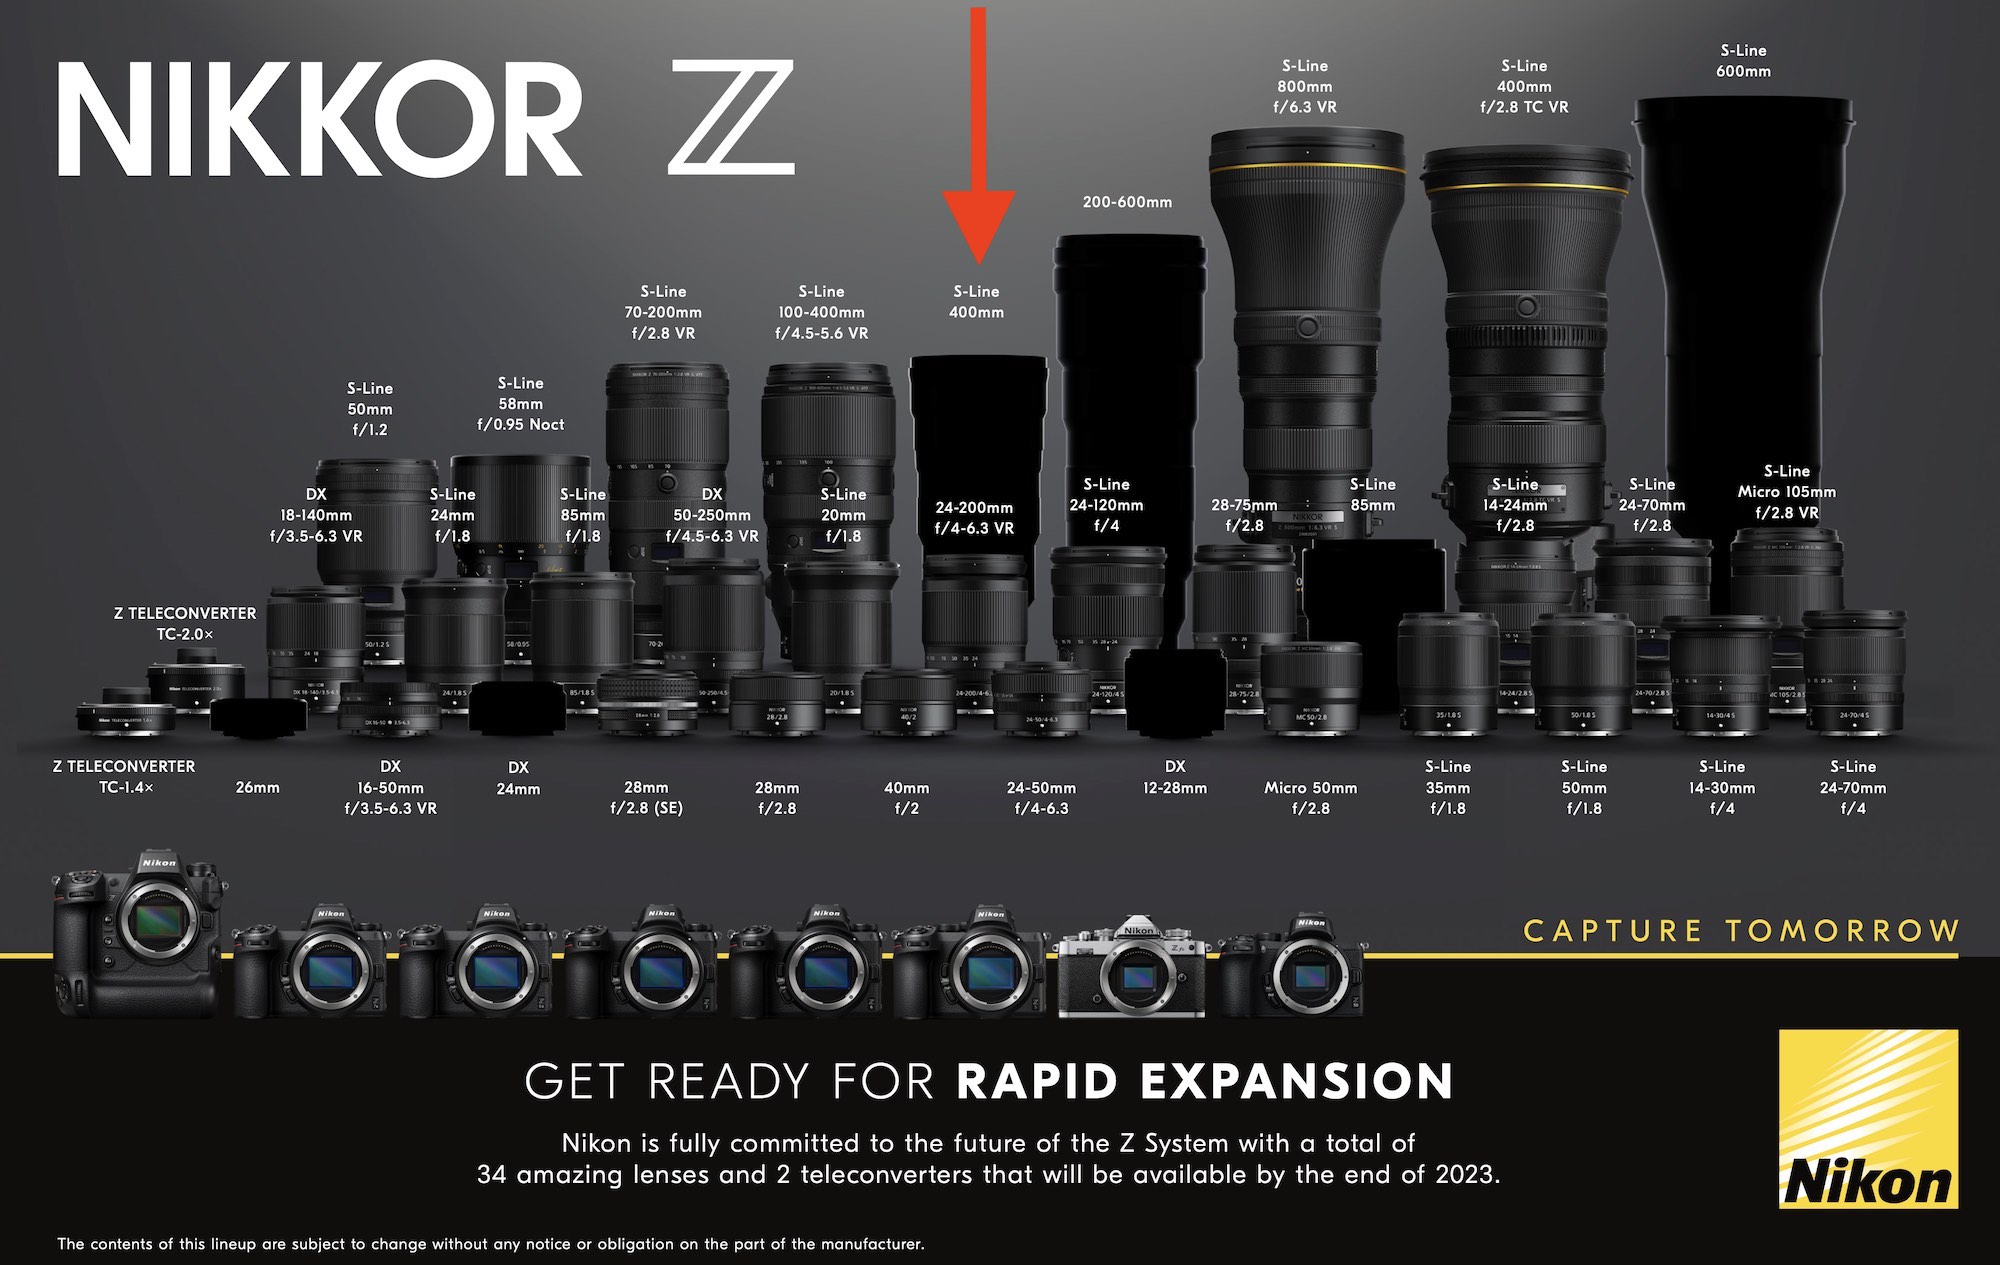 The new Nikon Nikkor Z 400mm f/4.5 VR S lens to be priced at around $2,000?